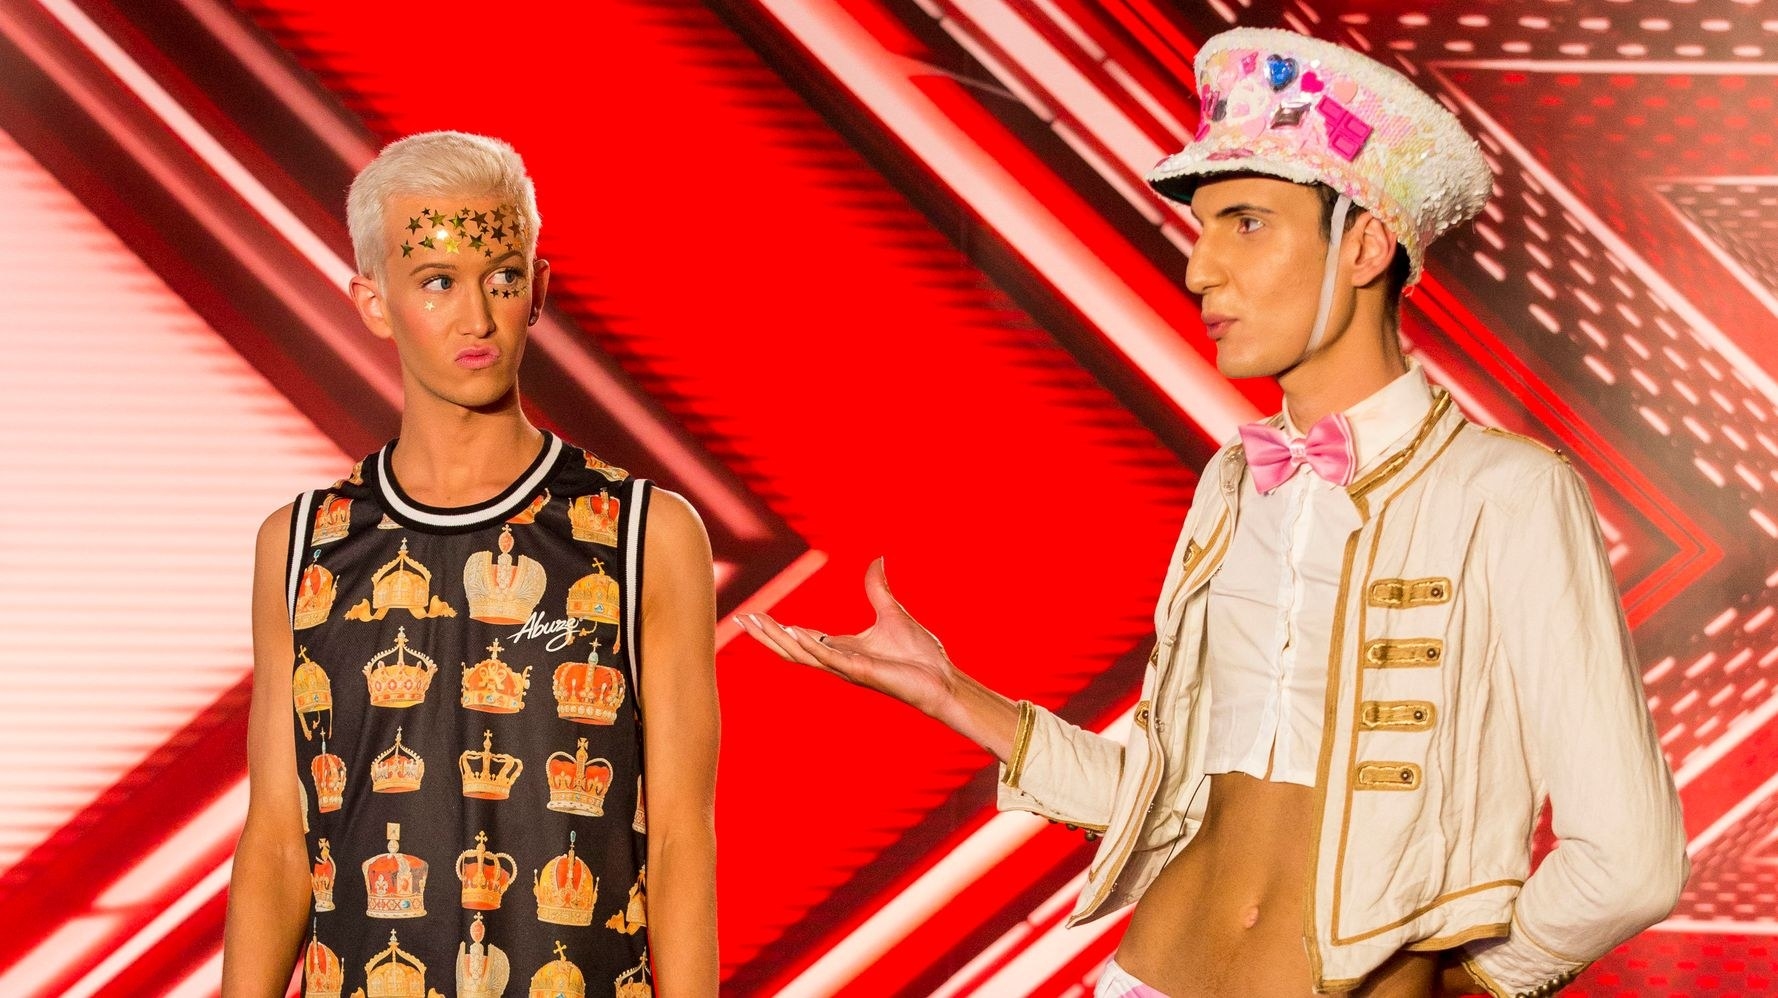 x factor duo ottavio and bradley stood arguing in their x-factor audtion